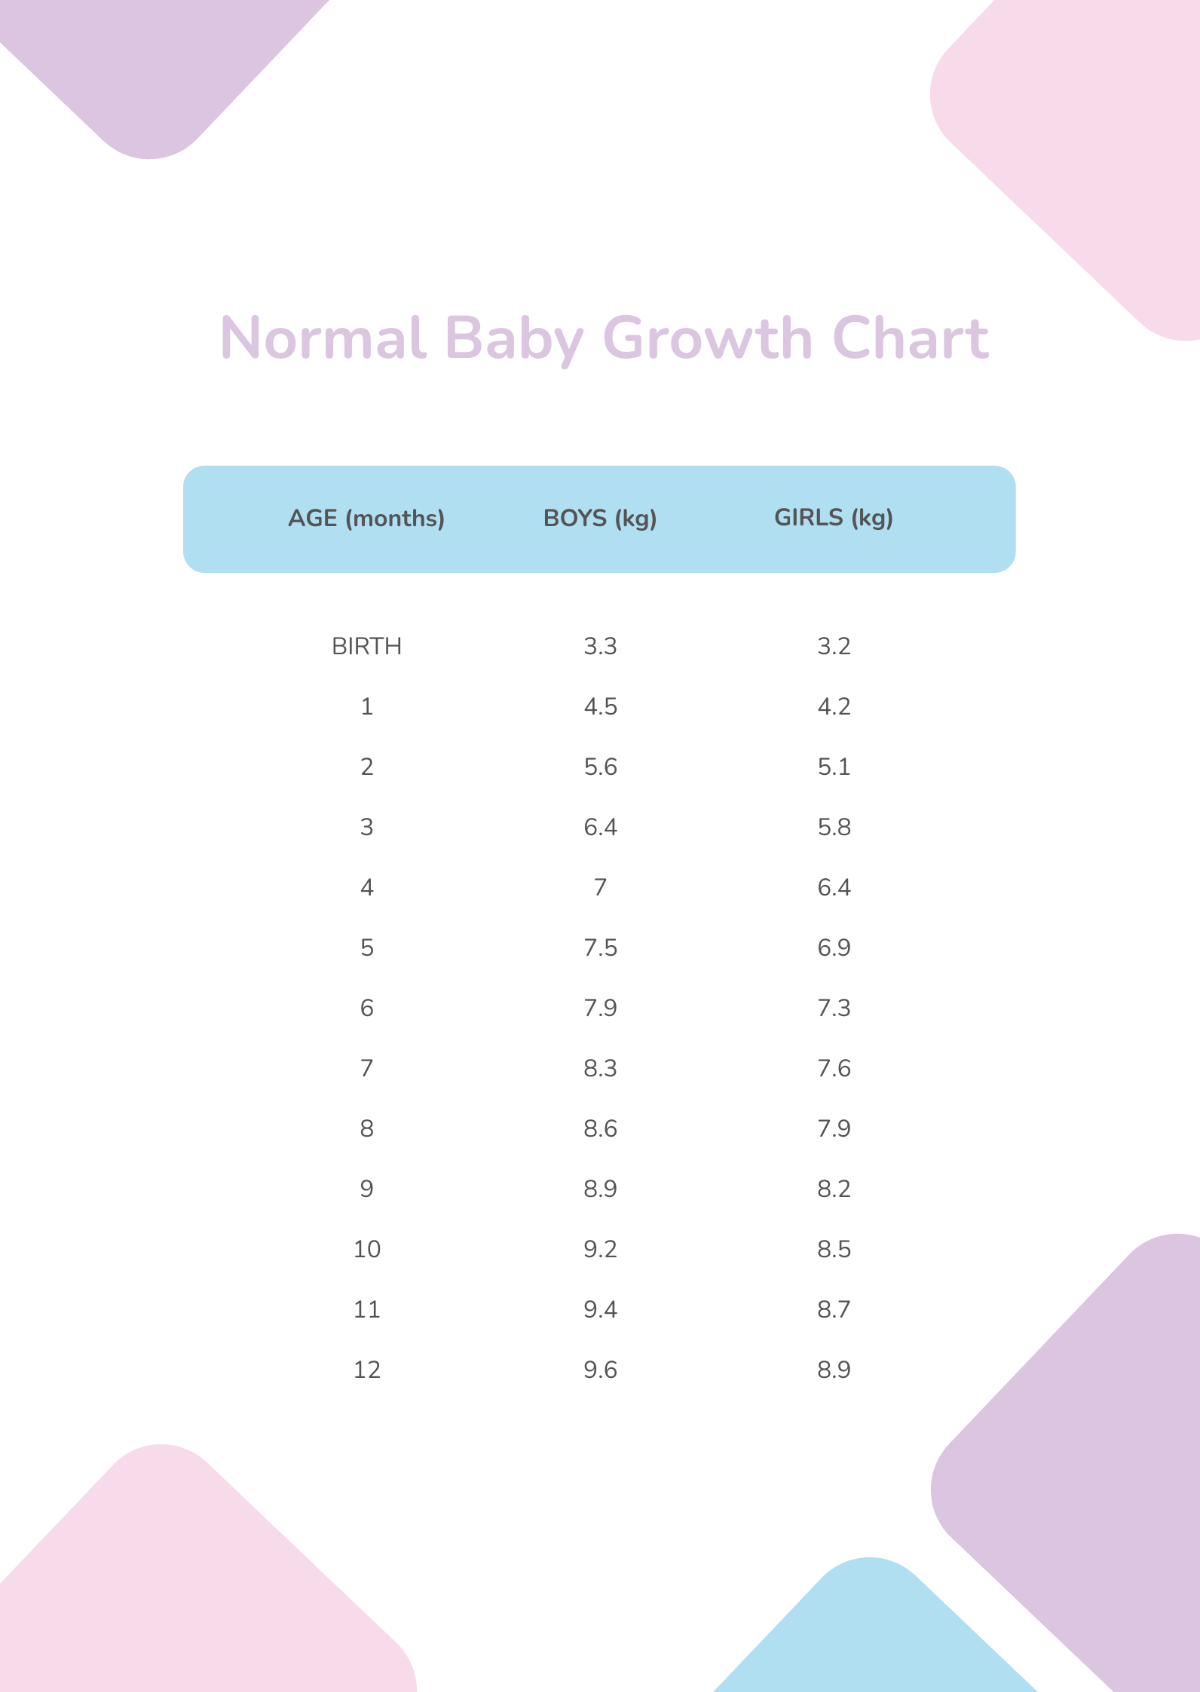 Normal Baby Growth Chart Template